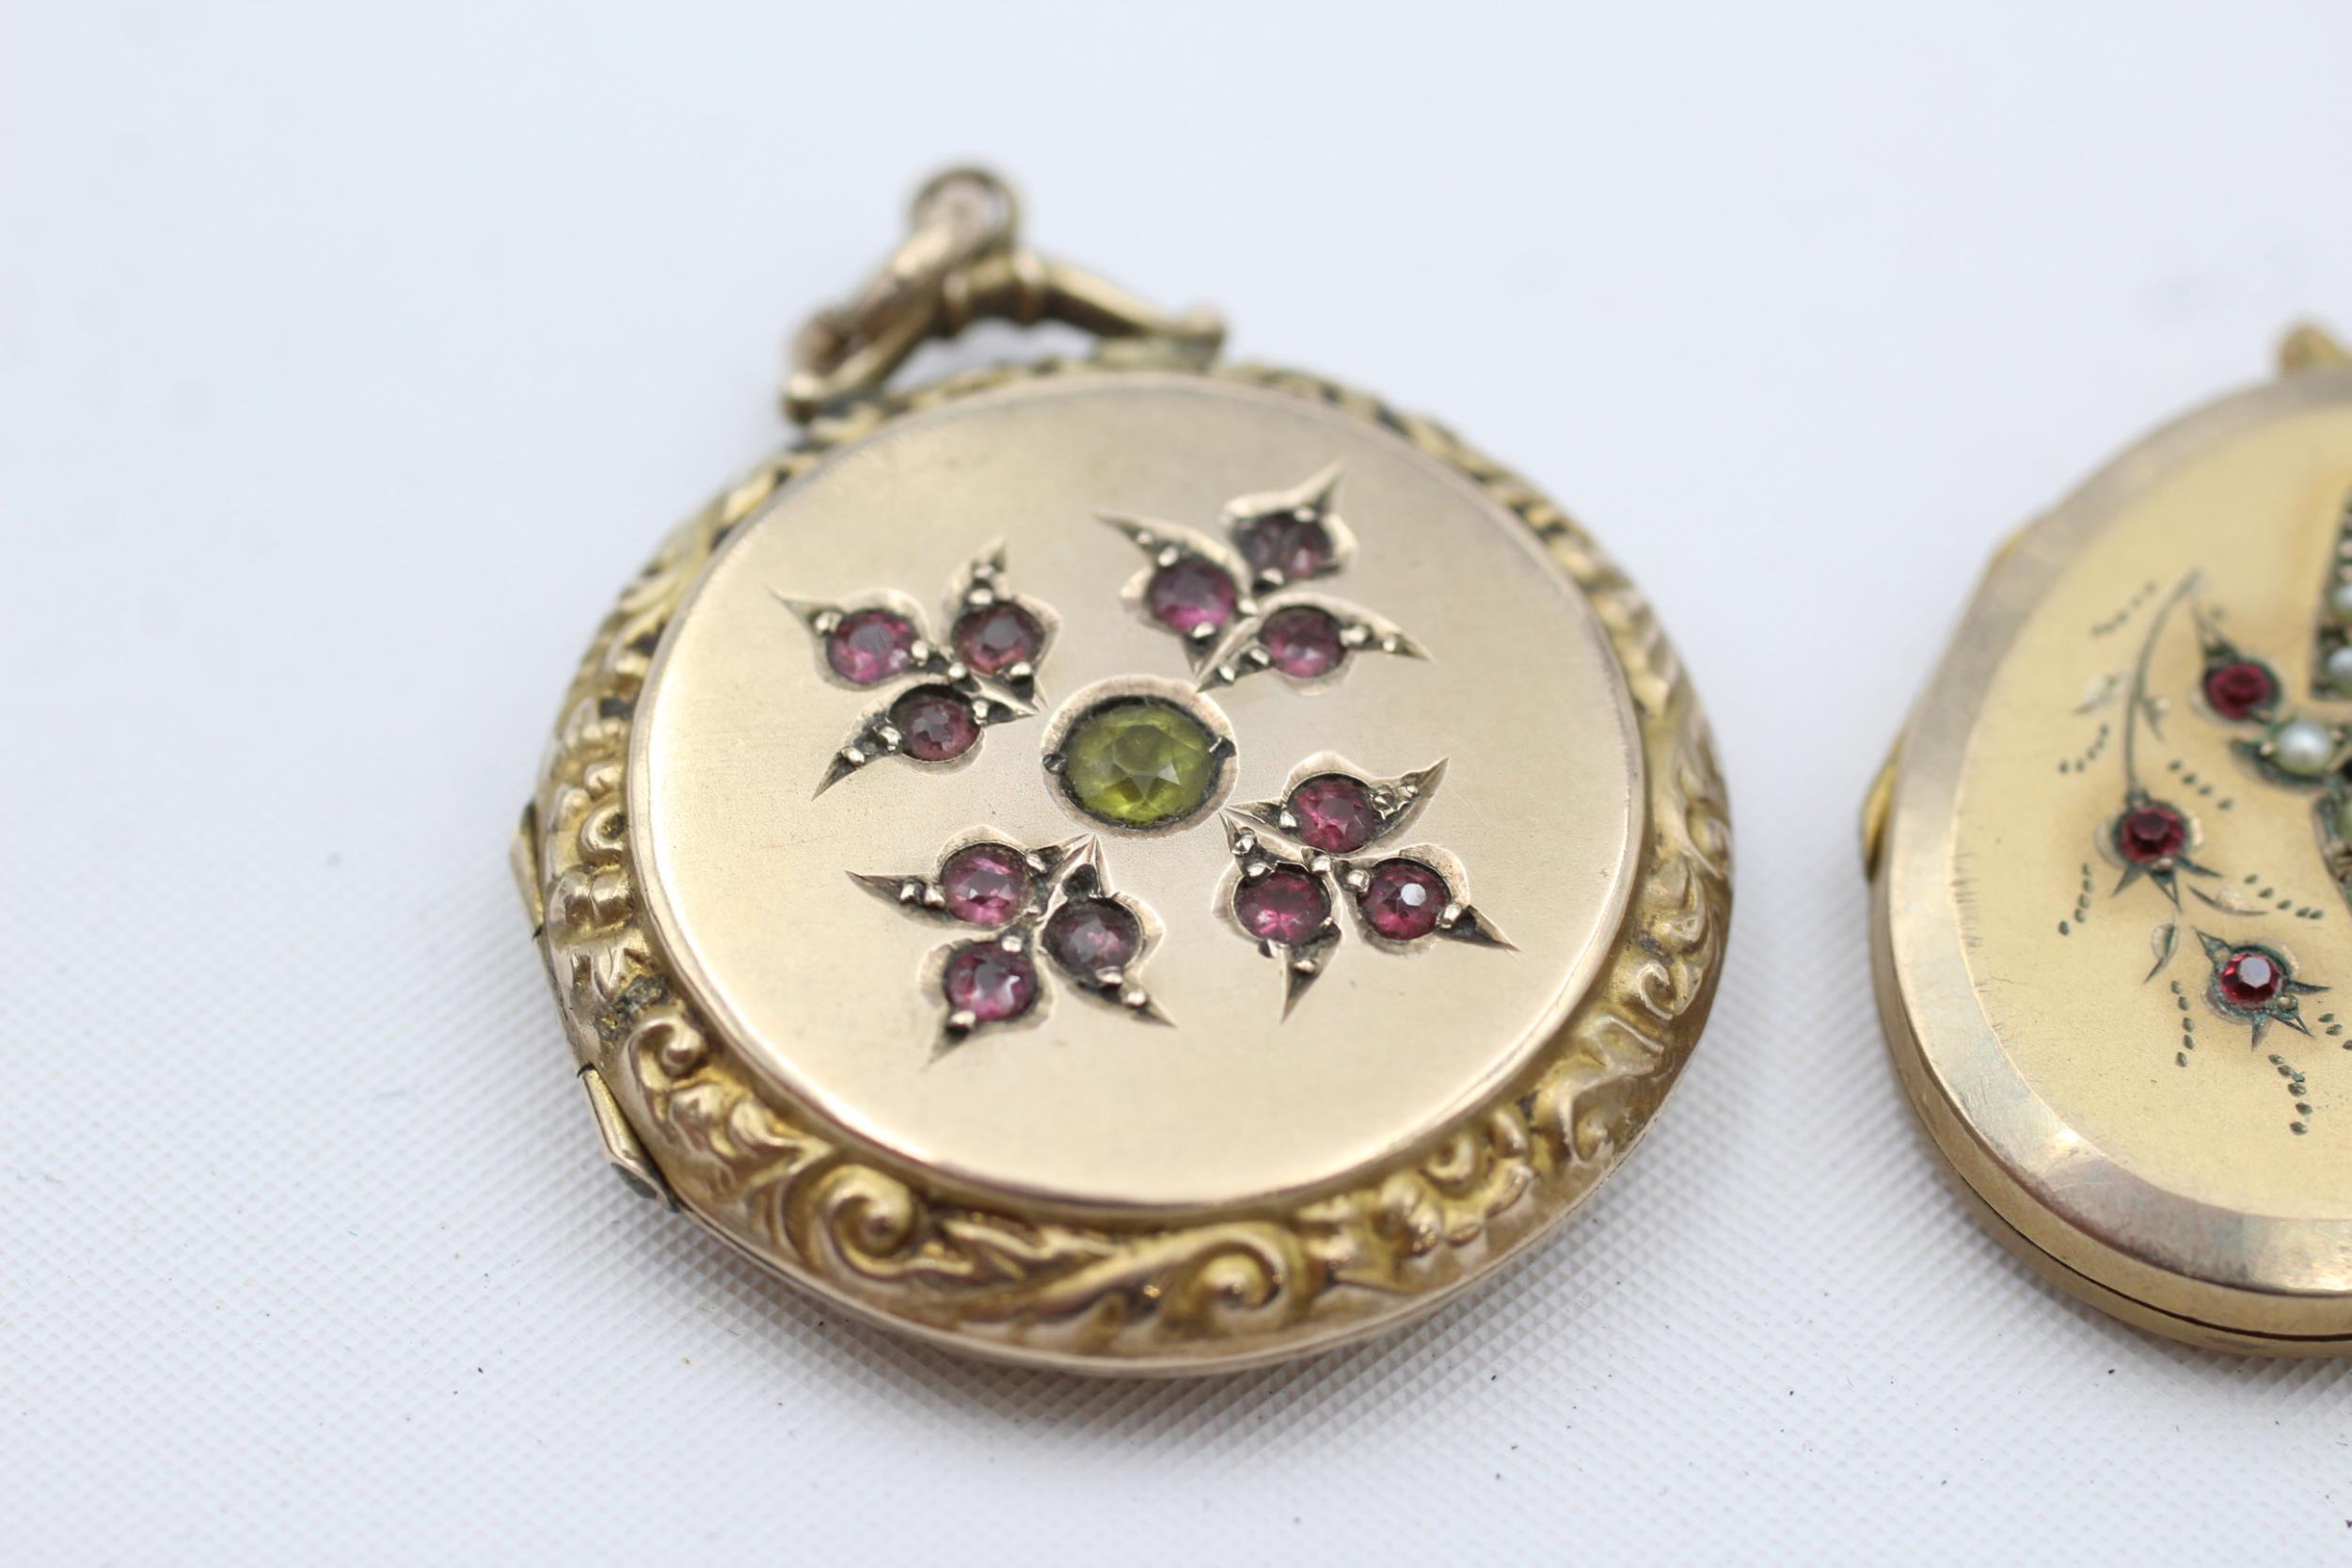 2 x 9ct back & front gold antique paste & seed pearl set lockets (13.2g) - Image 2 of 4